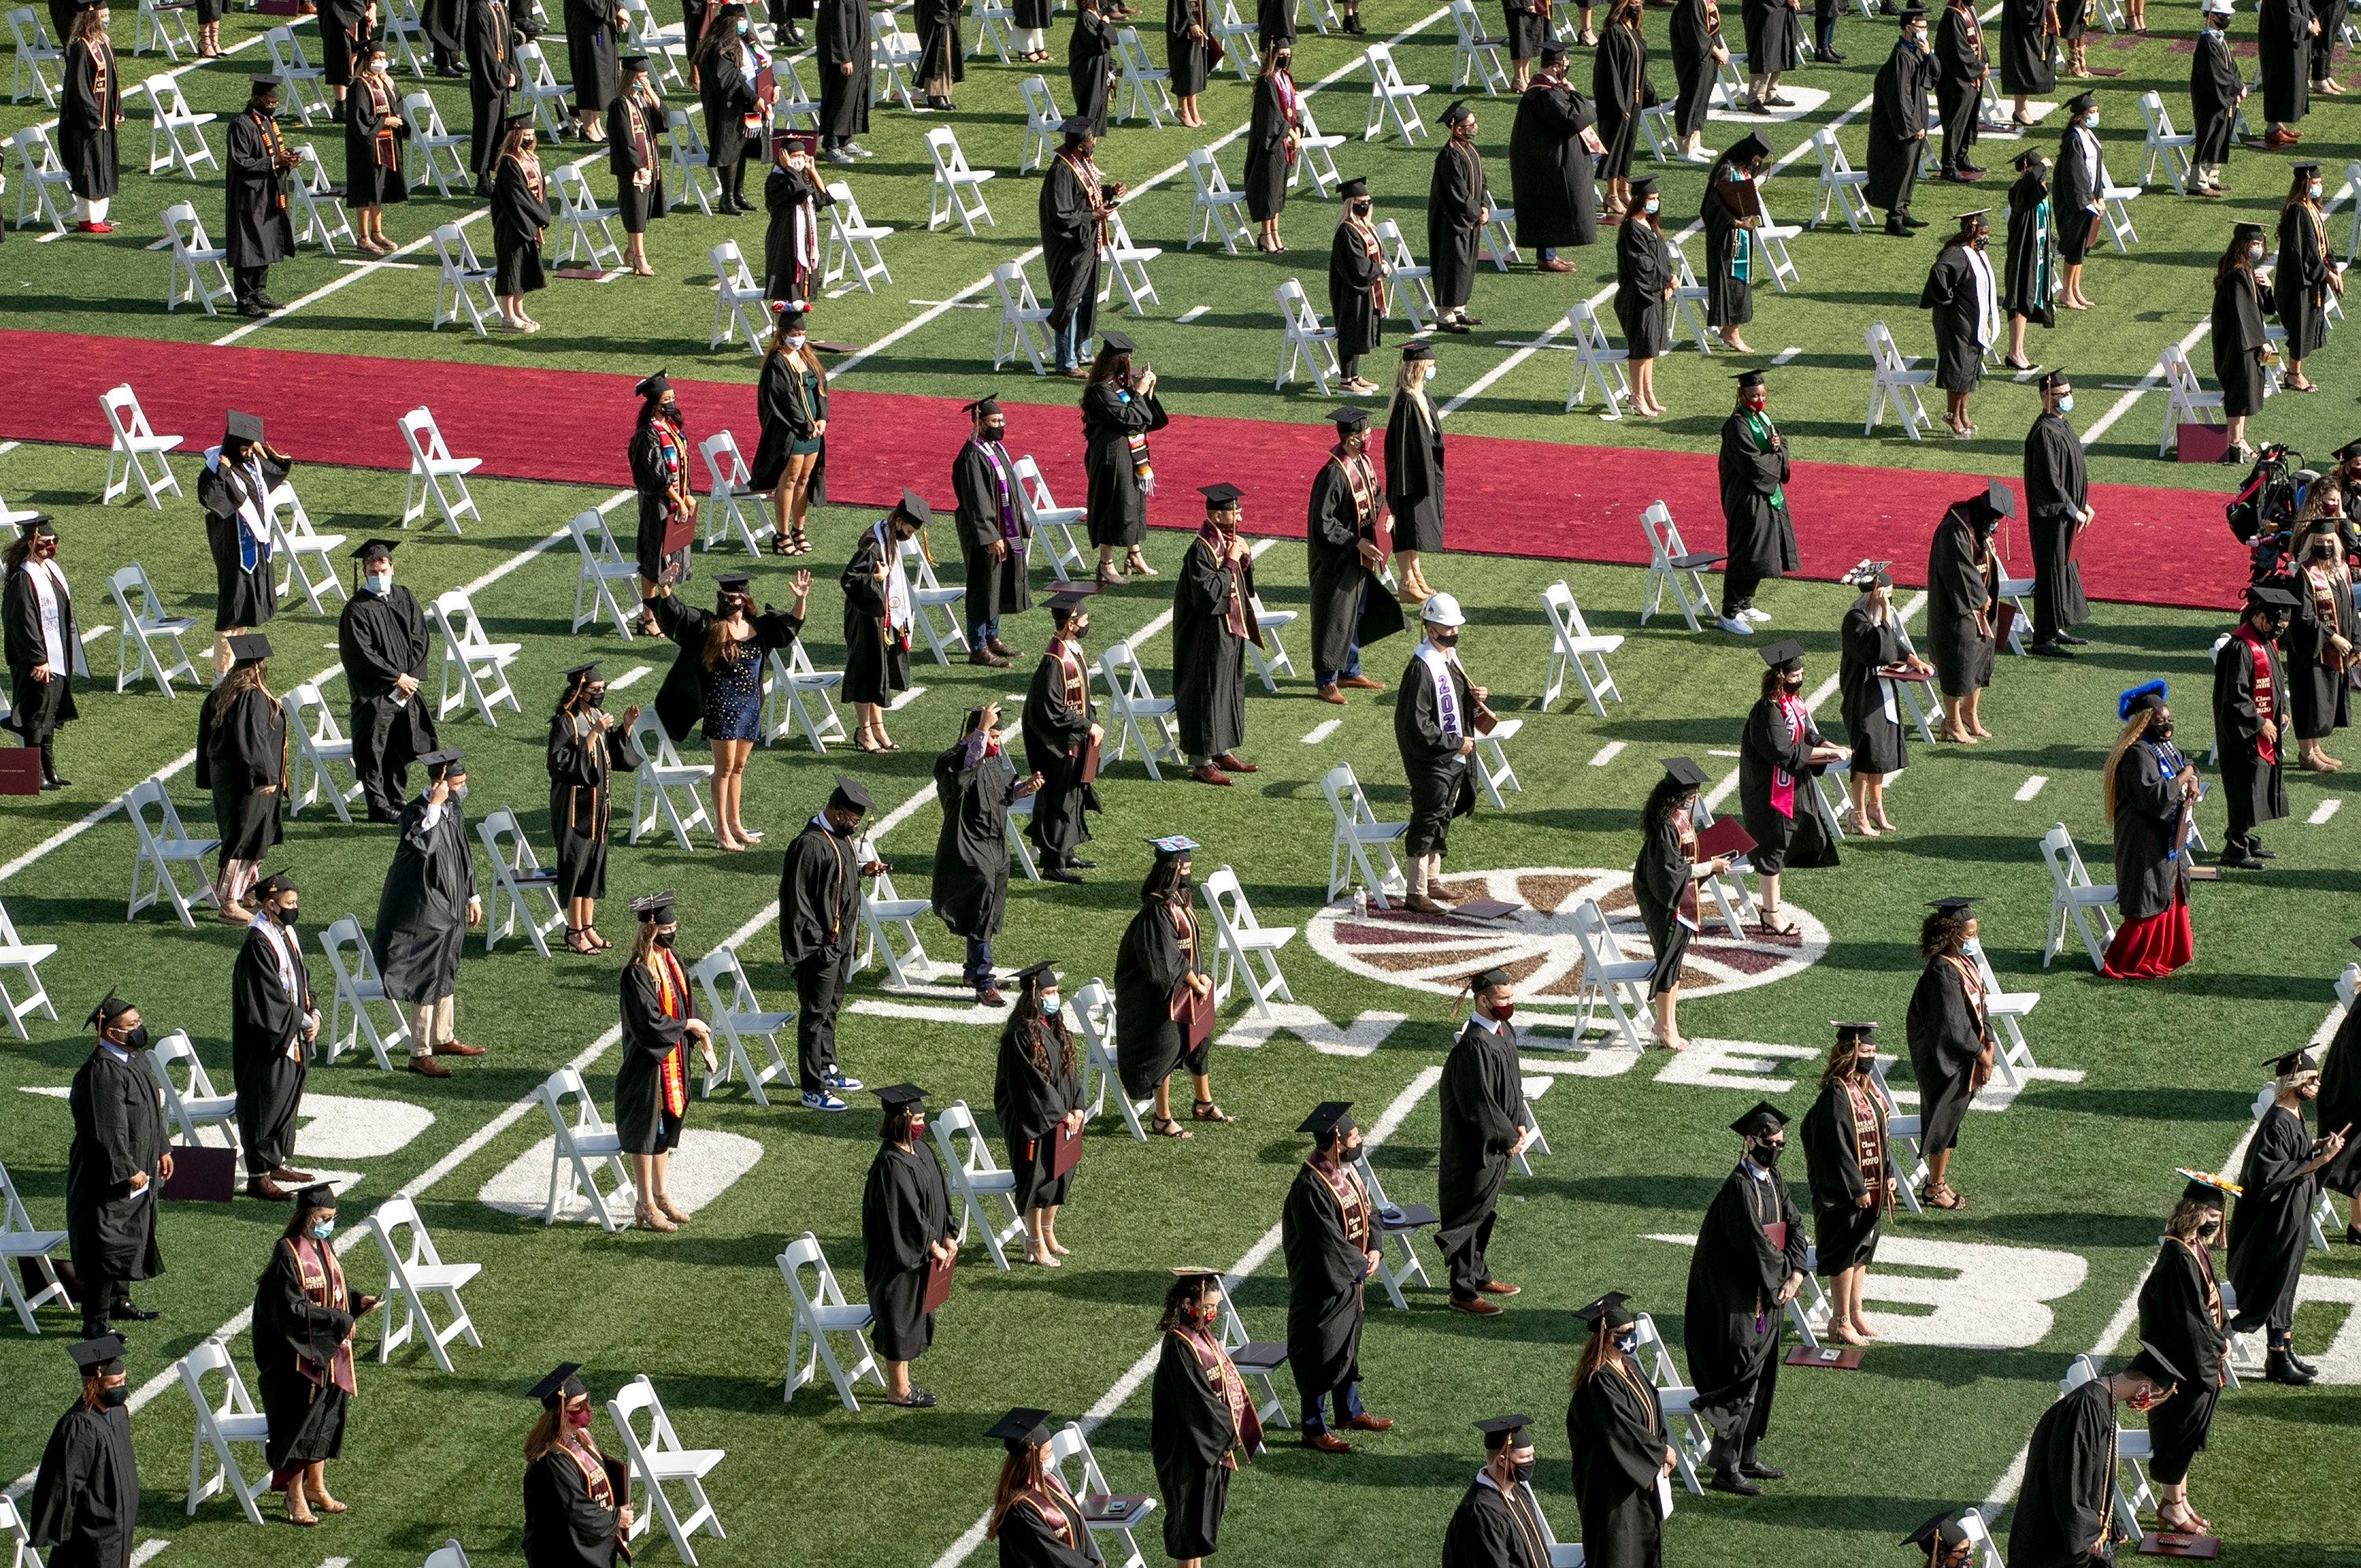 Texas State University graduates stand to be recognized at a commencement ceremony at Bobcat Stadium in San Marcos on Thursday December 10, 2020.   Spring and summer graduates participated in two socially distanced, outdoor commencement ceremonies on Thursday, and the fall candidates will graduate on Friday.